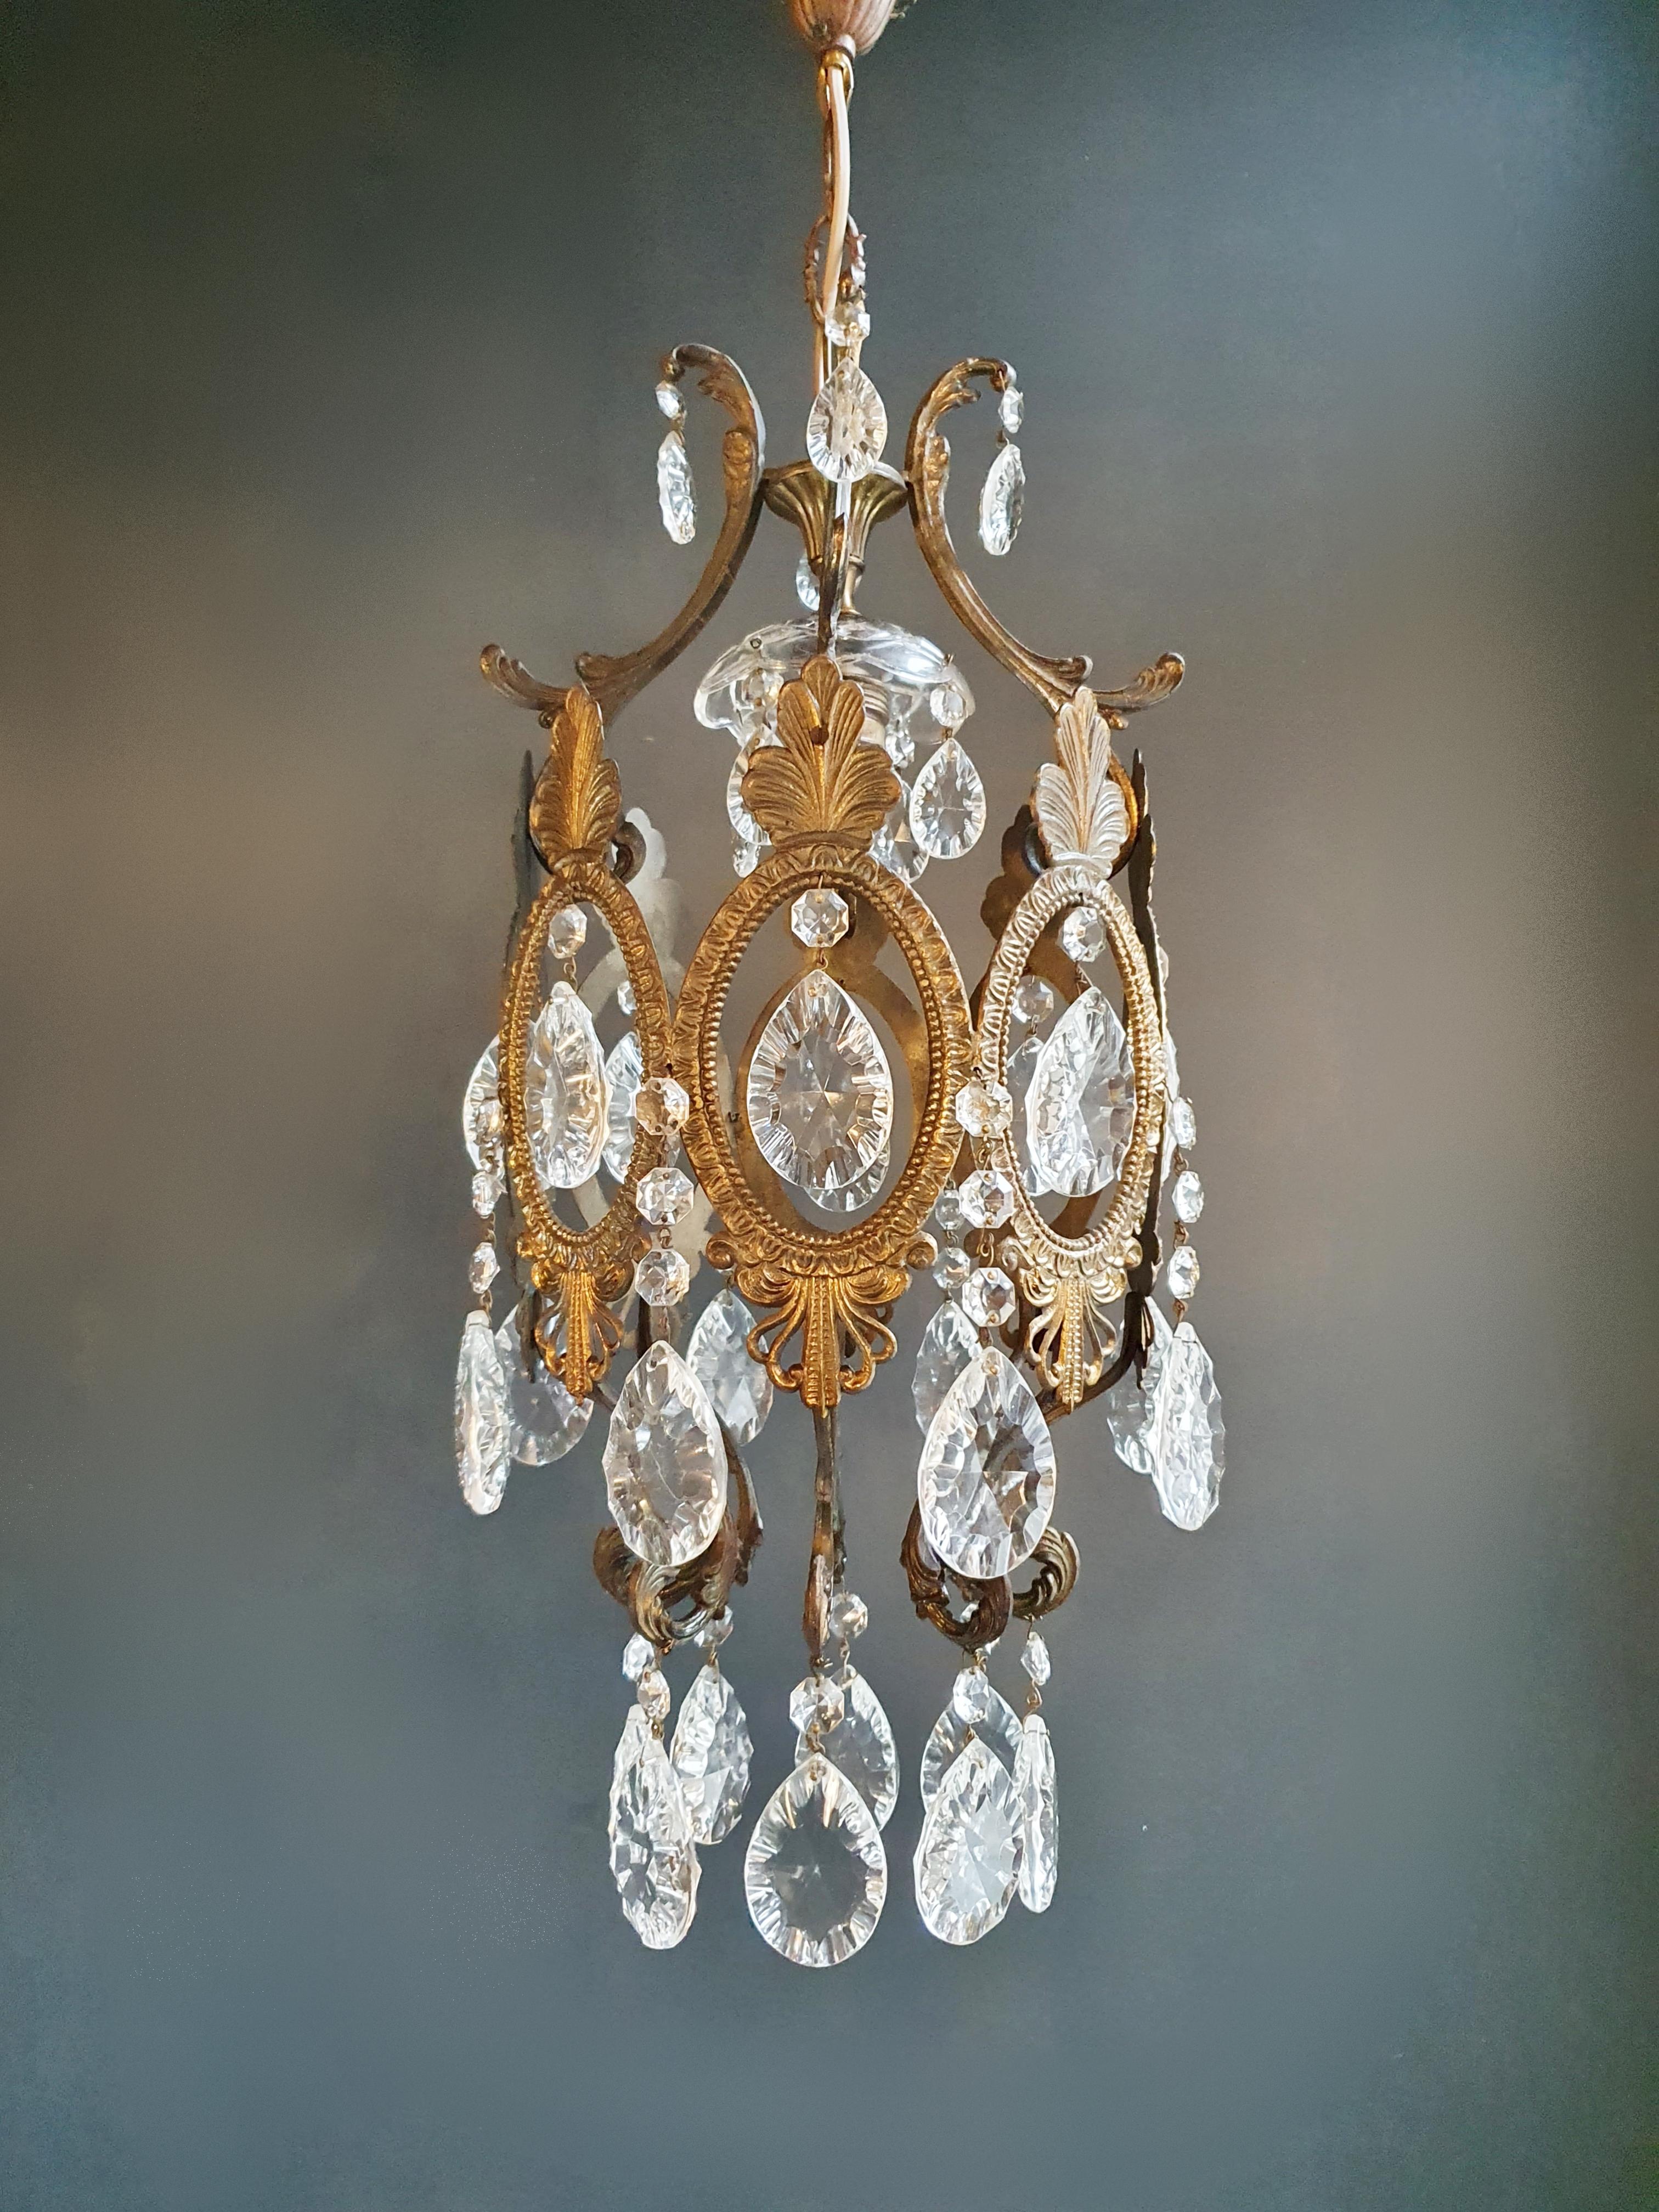 Restored Vintage Chandelier: A Testament to Elegance and Craftsmanship

Indulge in the allure of a bygone era with this antique chandelier, lovingly restored in Berlin. Its electrical wiring has been thoughtfully adapted to seamlessly integrate into